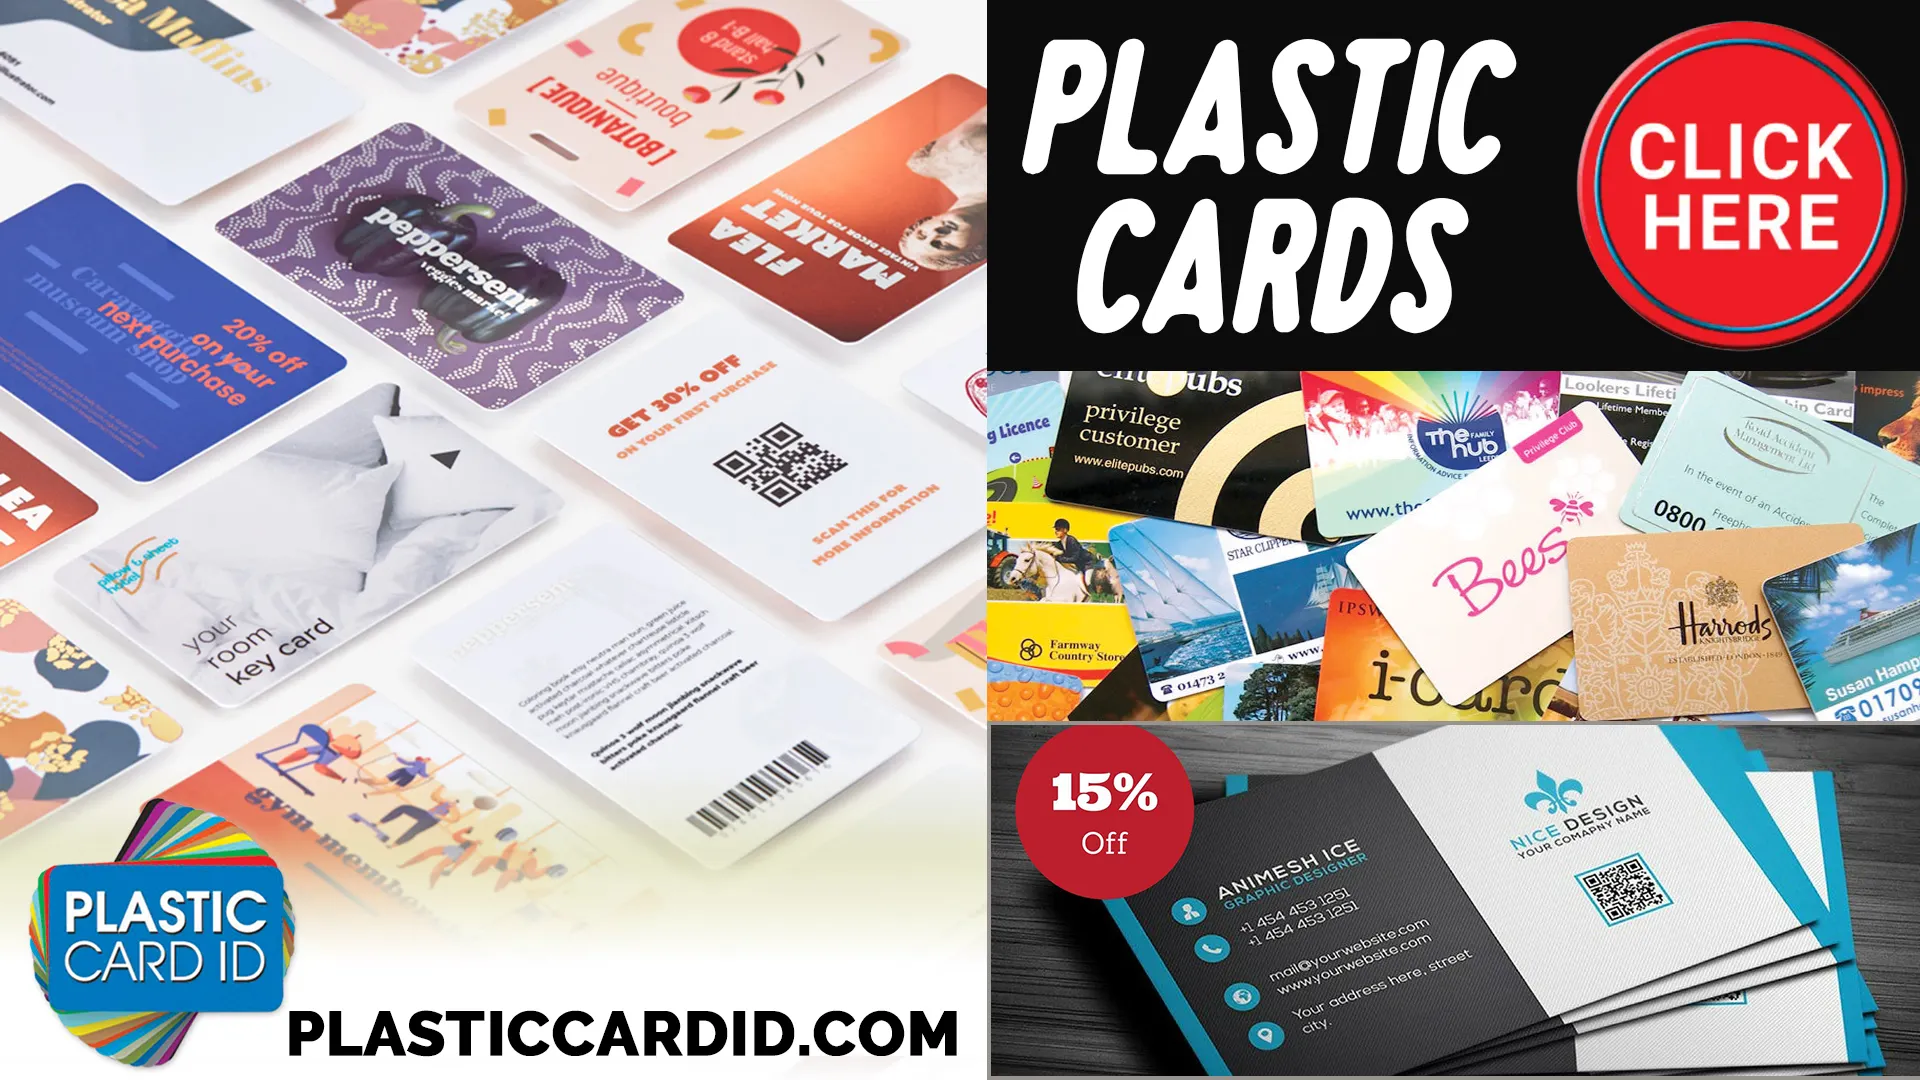 Why Choose Plastic Card ID
 for Your Smart Chip Card Needs?